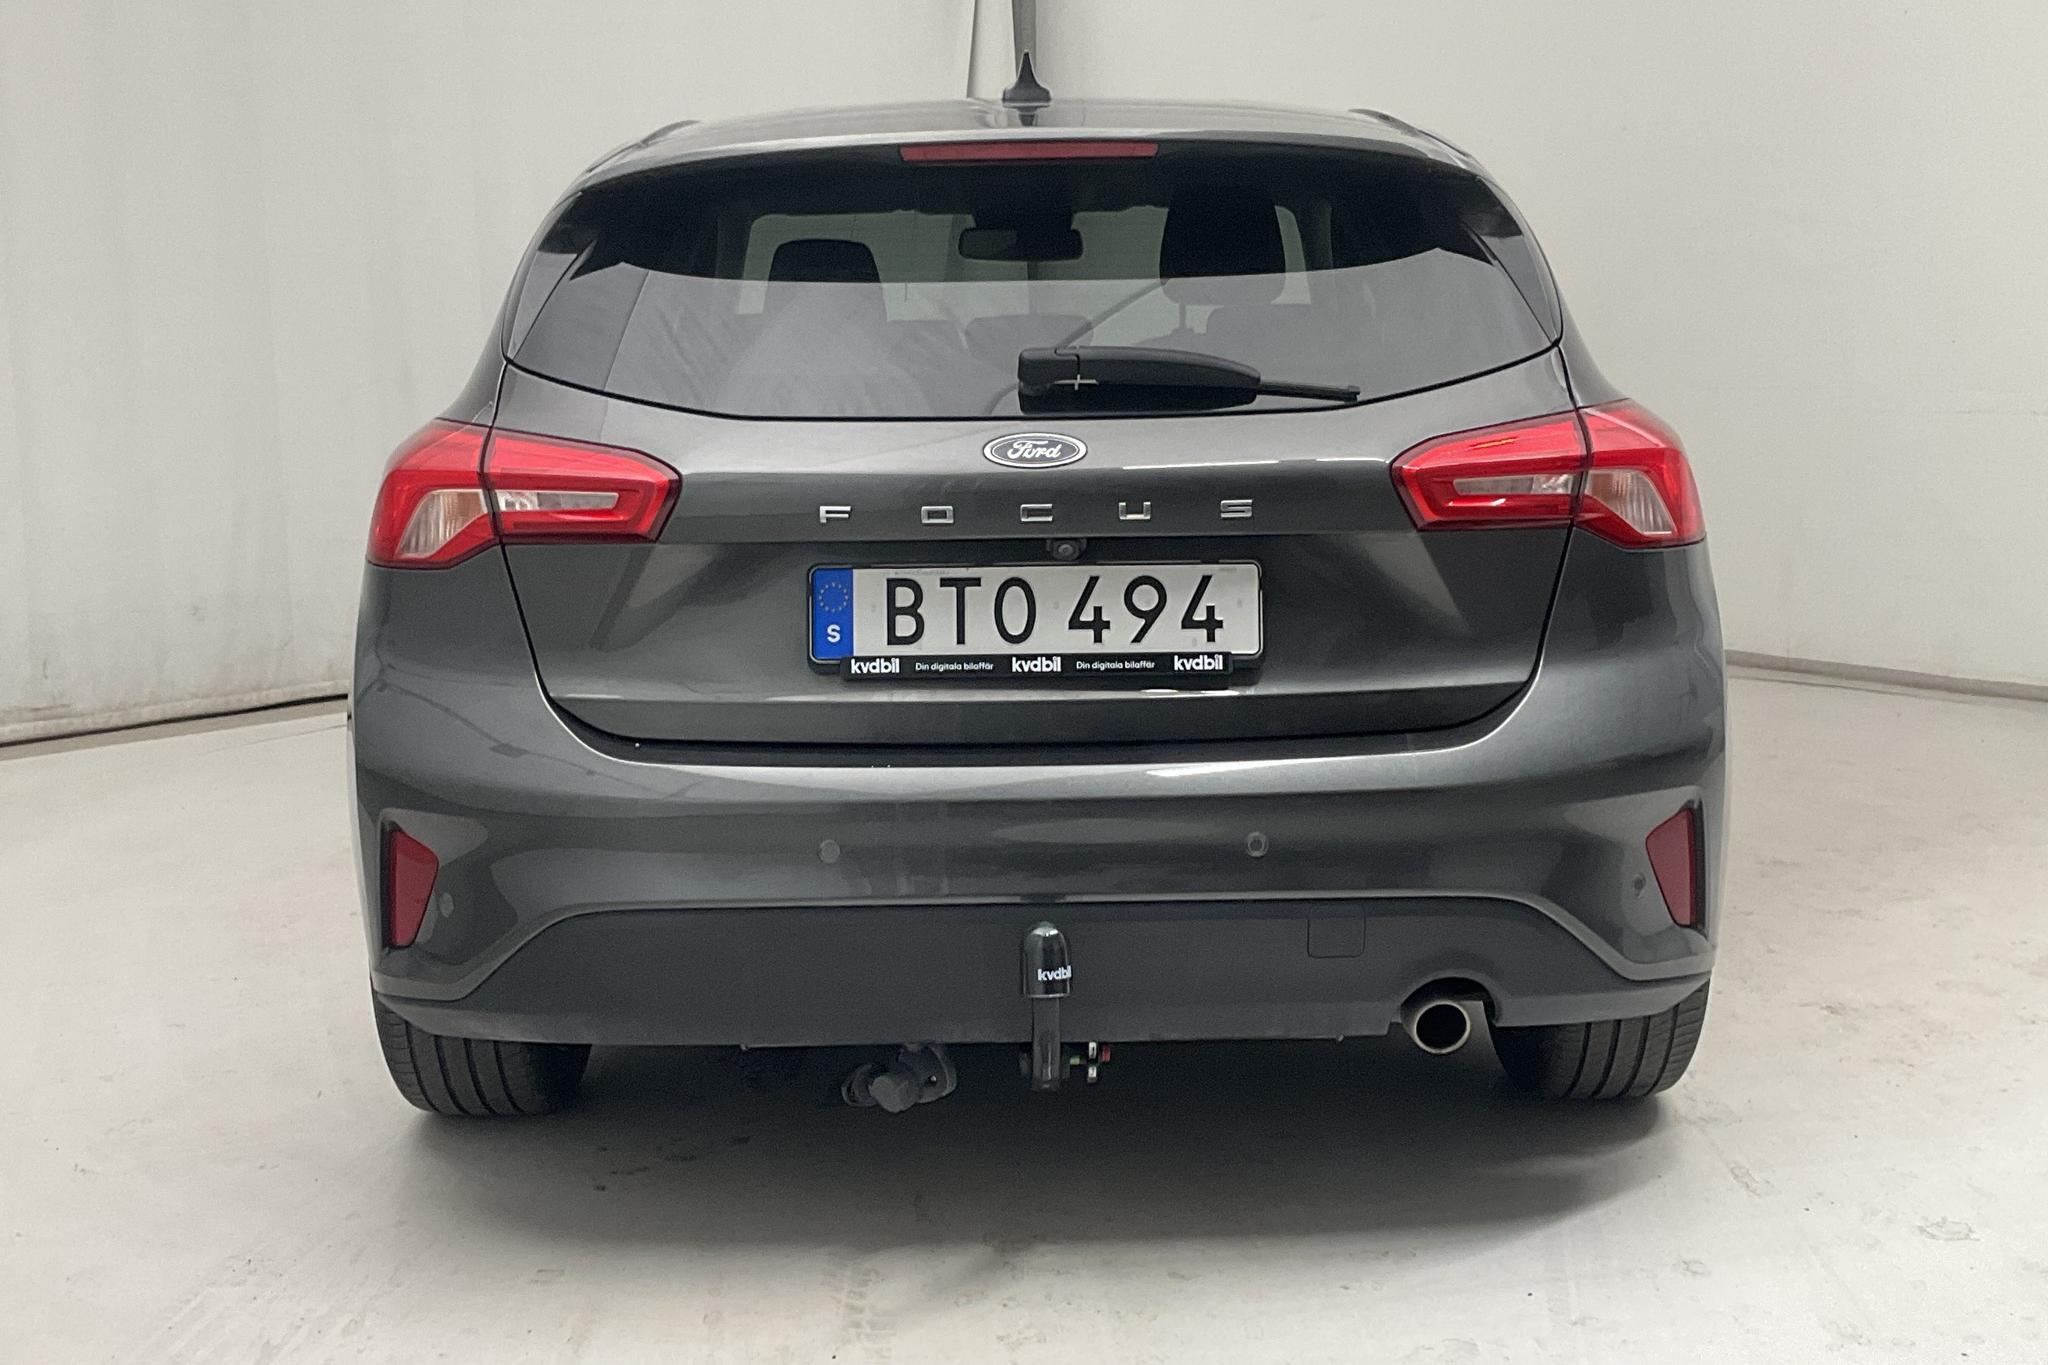 Ford Focus 1.0T EcoBoost 5dr (125hk) - 50 900 km - Manual - gray - 2019